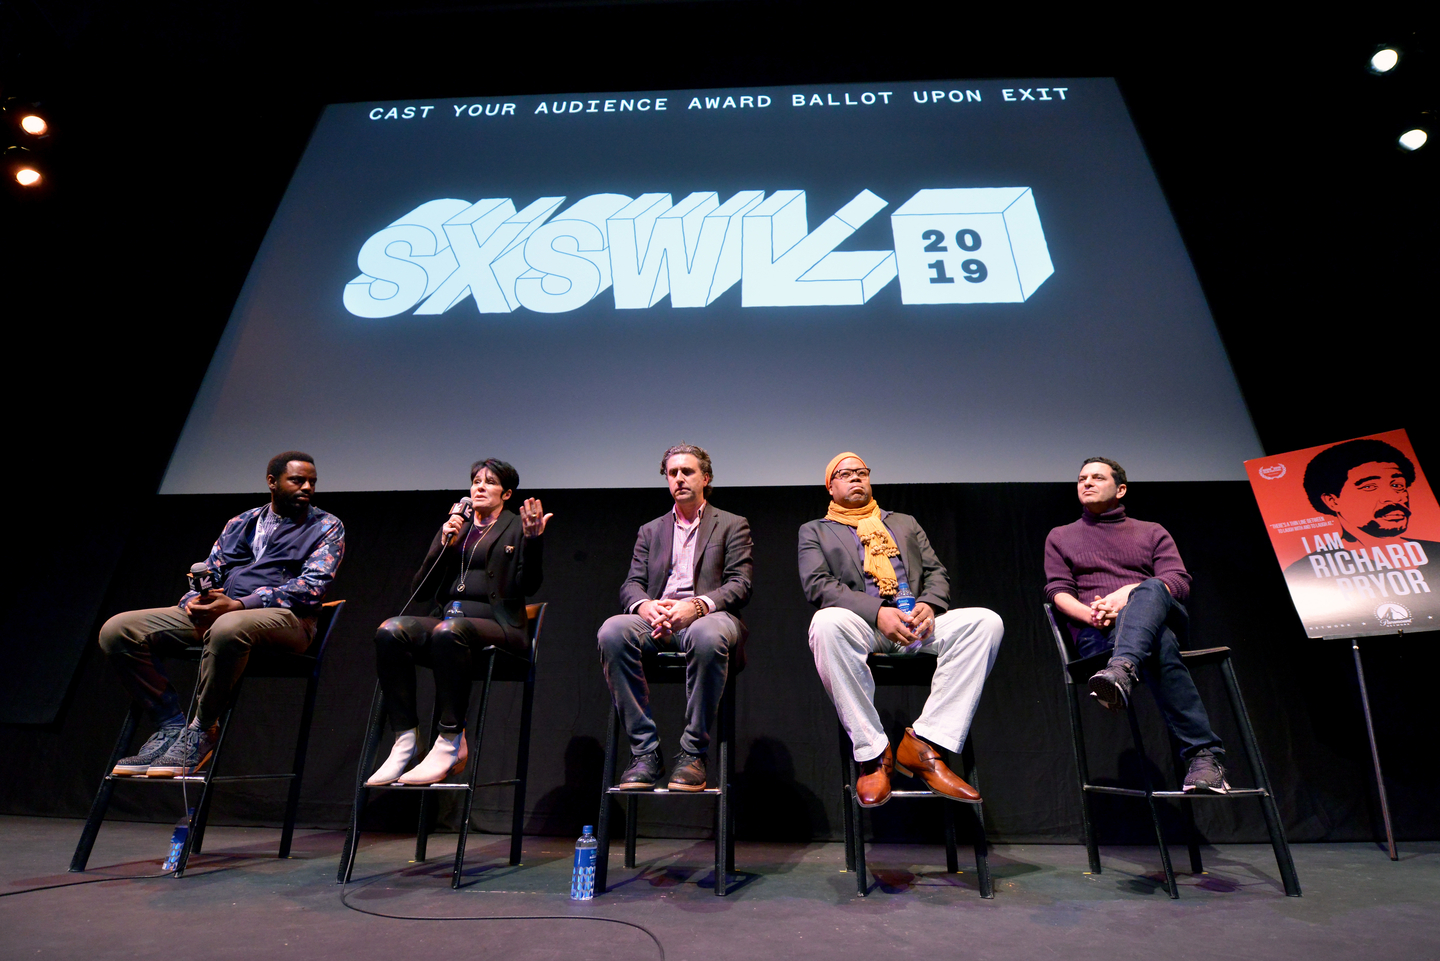 (L-R) Baron Vaughn, Jennifer Lee Pryor, Jesse James Miller, Greg Tate, and Scott Saul at the I Am Richard Pryor World Premiere – Photo by Nicola Gell/Getty Images for SXSW